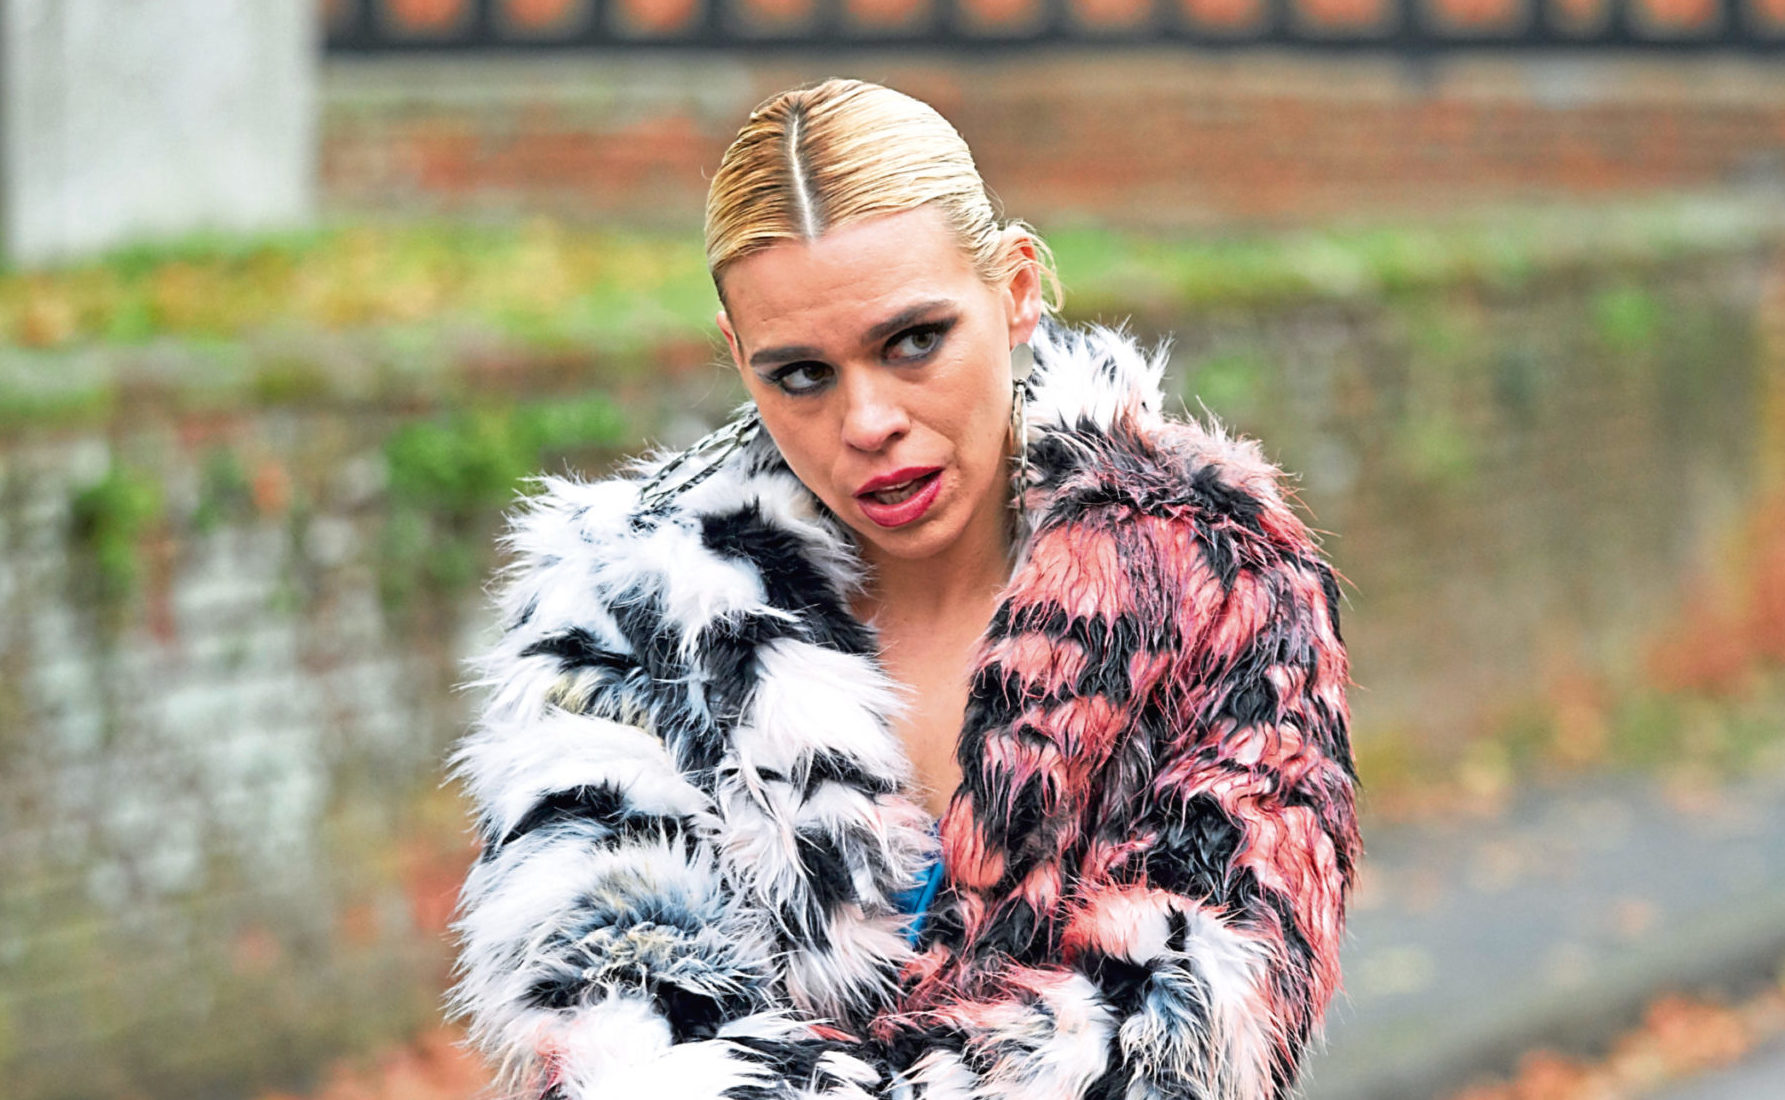 Billie Piper as Suzie Pickles whose life is torn apart when private pictures are leaked